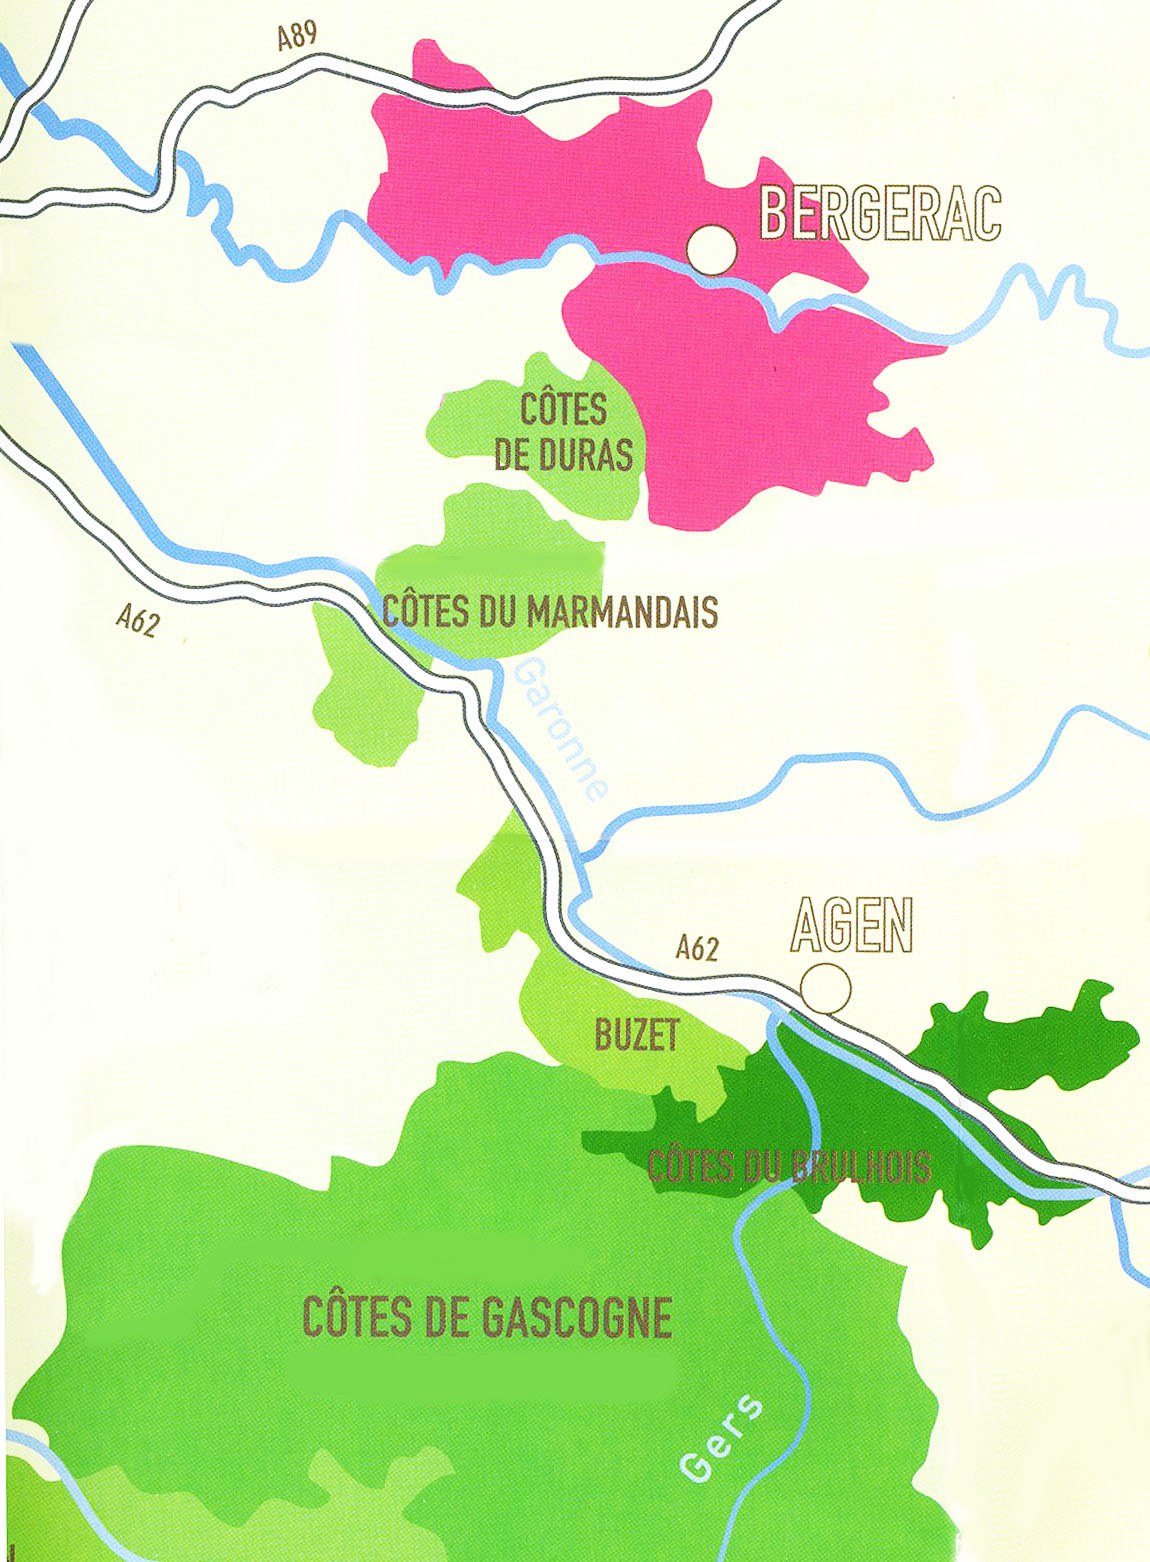 Beyond Bordeaux Satellites: From Bergerac to GuildSomm - - Neal Feature Articles Charles Gascony - International